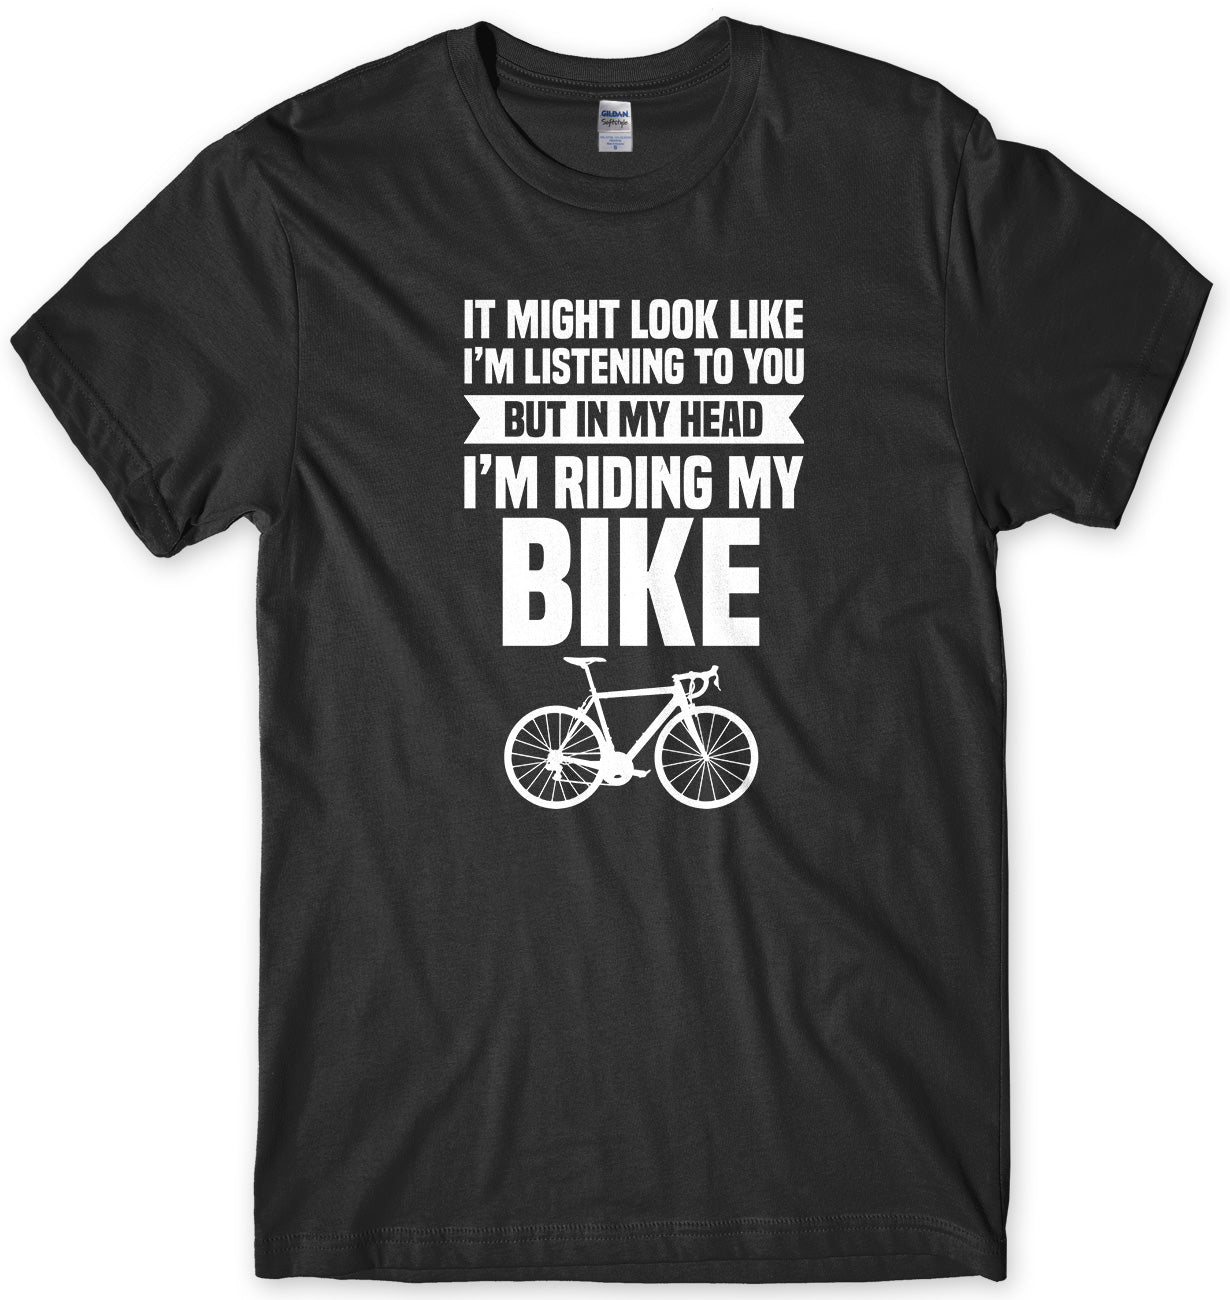 It Might Look Like I'm Listening To You But In My Head I'm Riding My Bike Mens T-Shirt